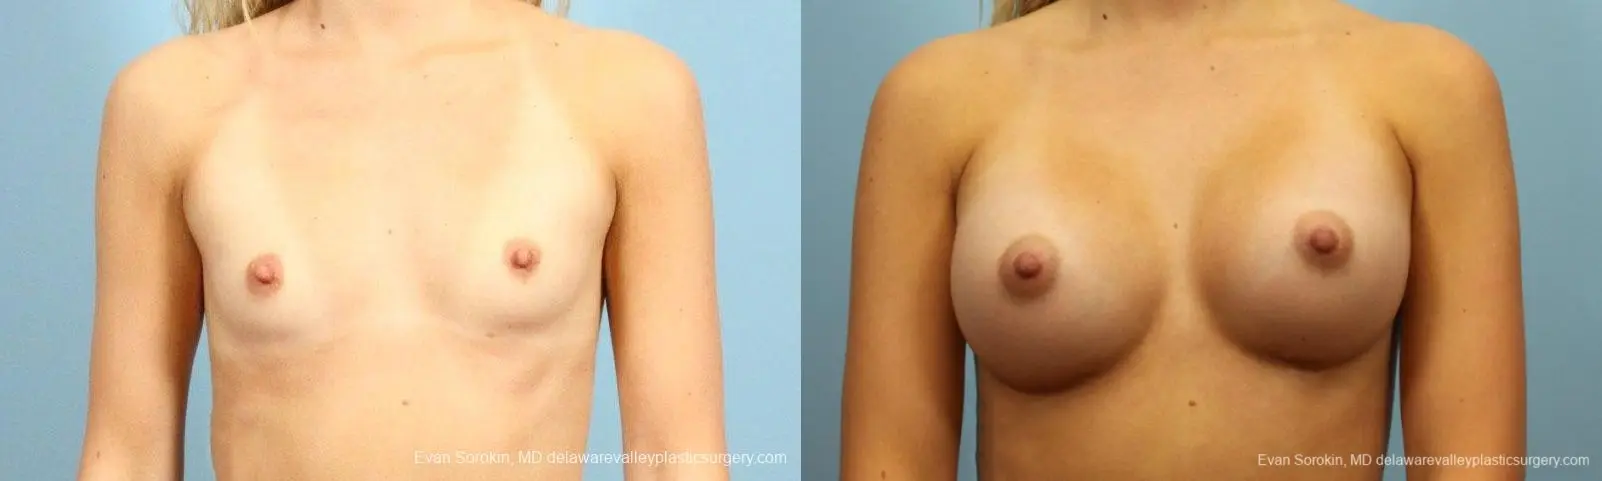 Philadelphia Breast Augmentation 9409 - Before and After 1